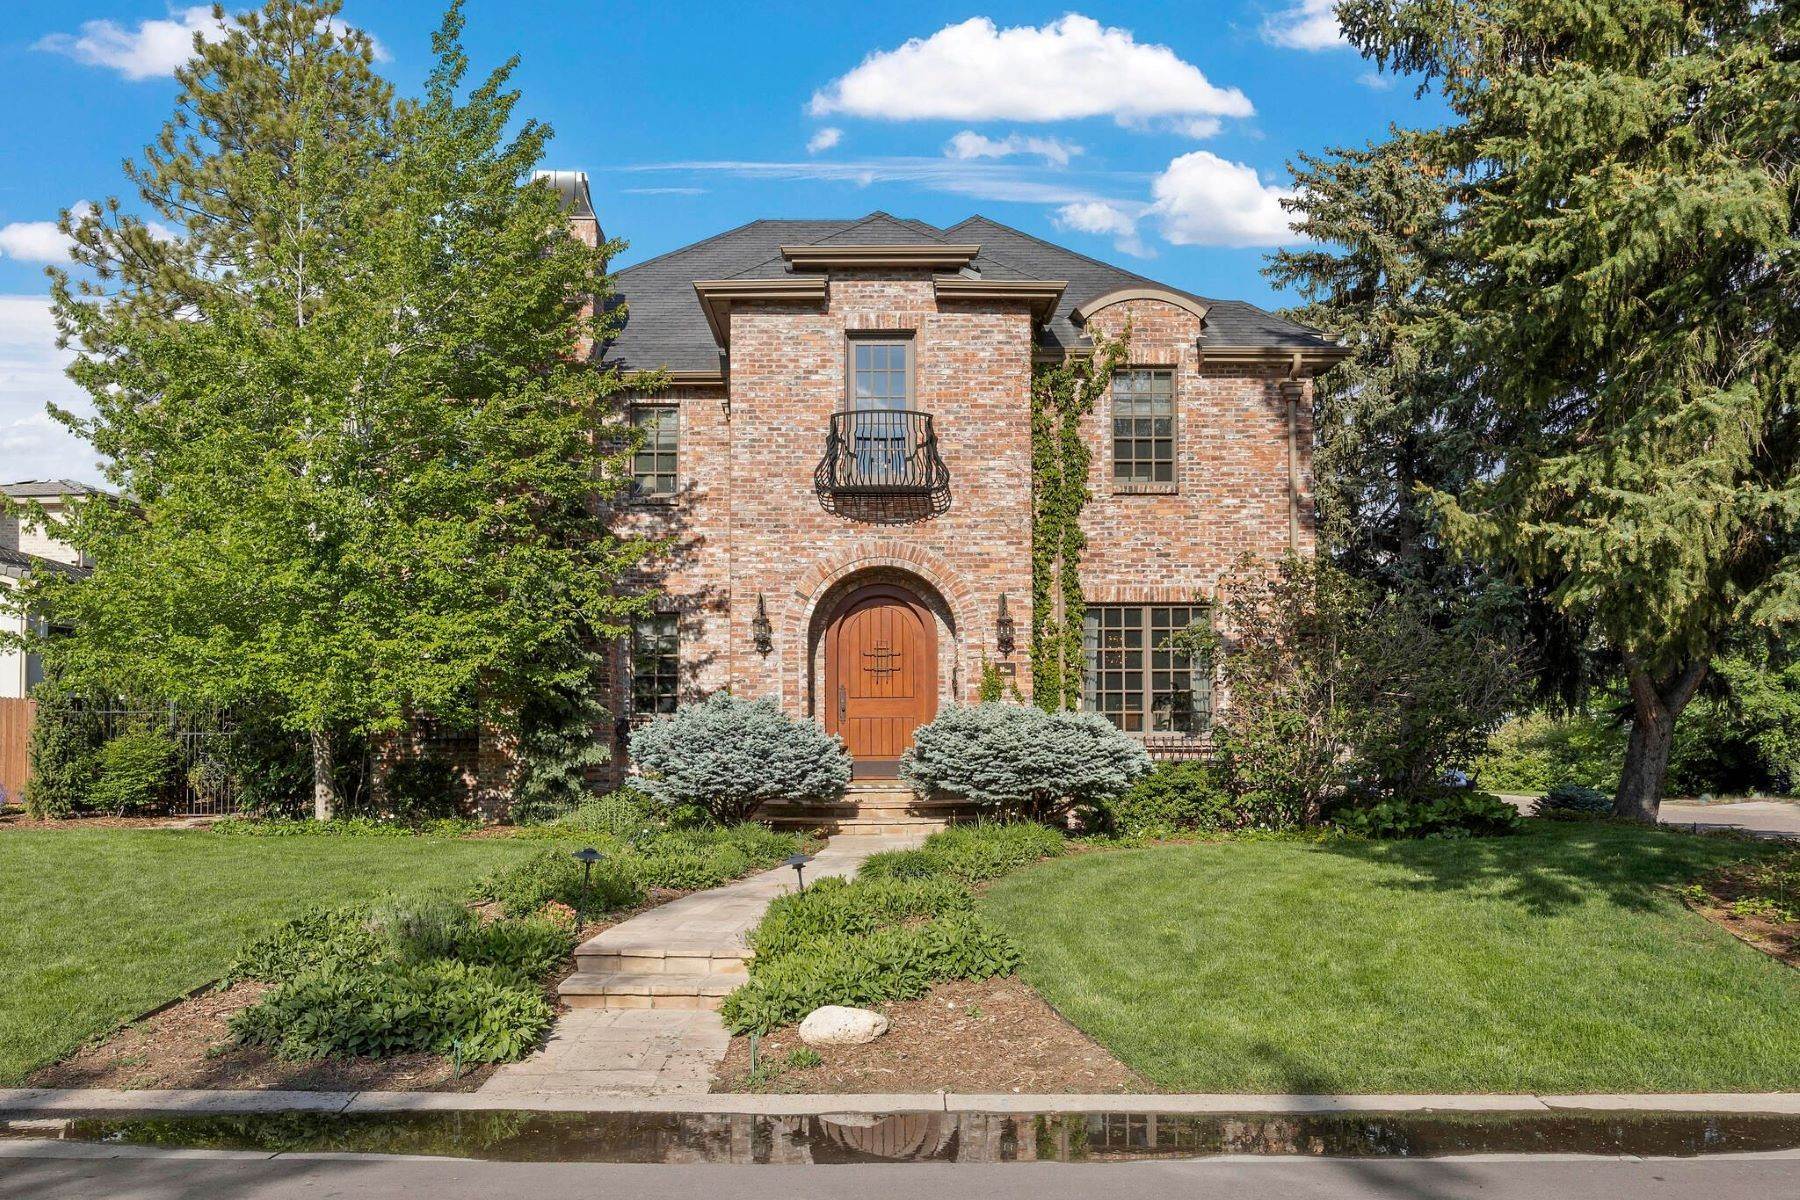 Single Family Homes for Active at Outstanding, Treasure of a Home in The Coveted Crestmoor Neighborhood! 90 South Ivy Street Denver, Colorado 80224 United States